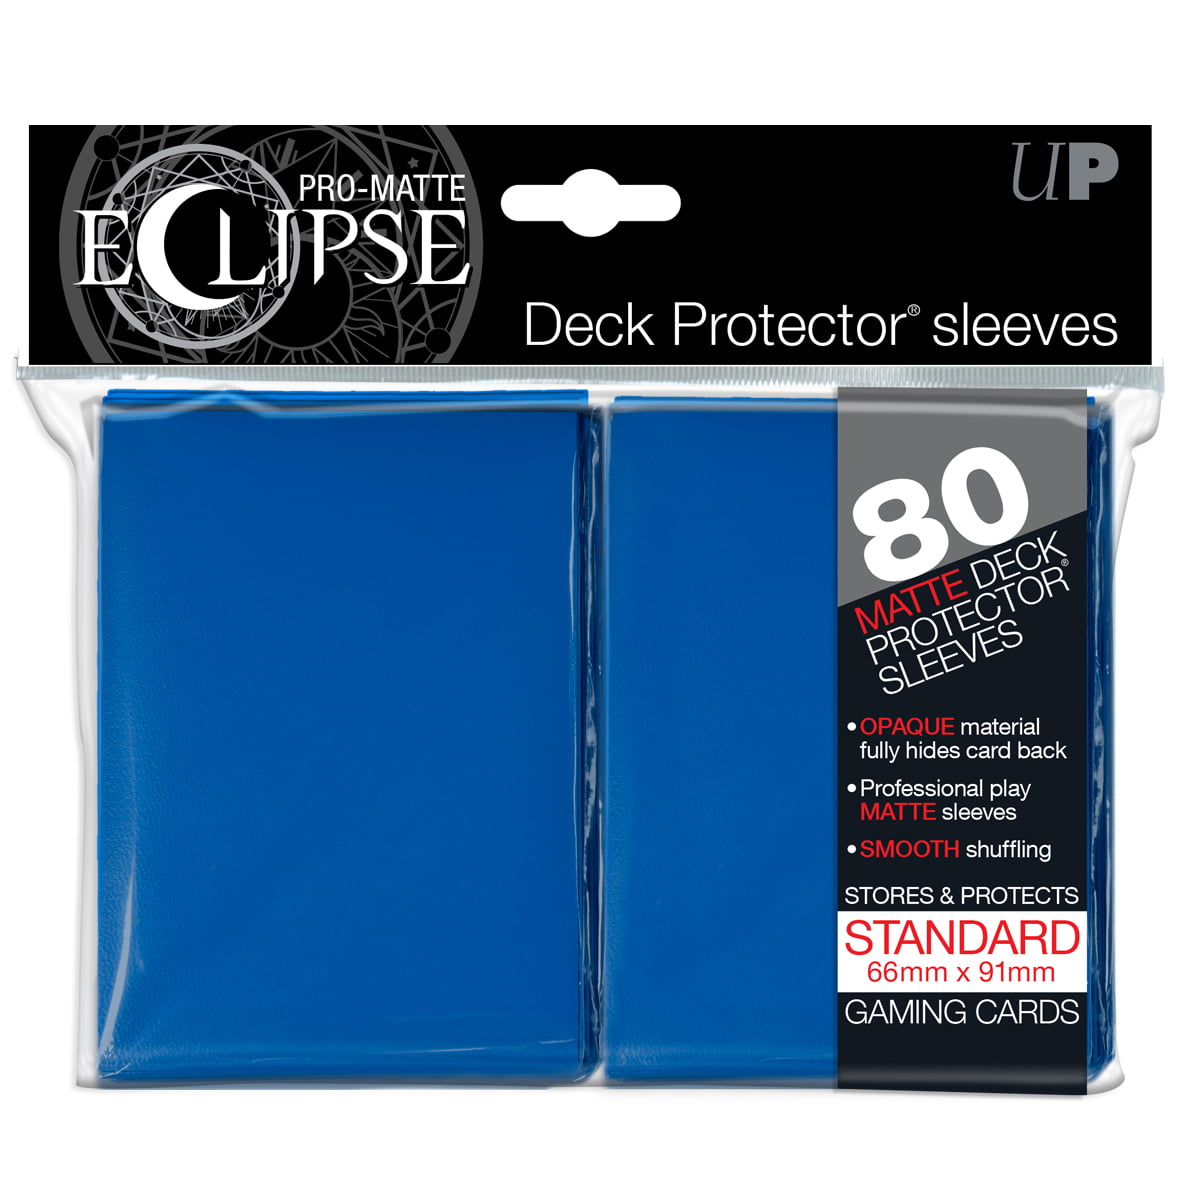 Ultra Pro Eclipse Deck Protector Sleeves Pro-matte Lime Green Standard 100ct for sale online 